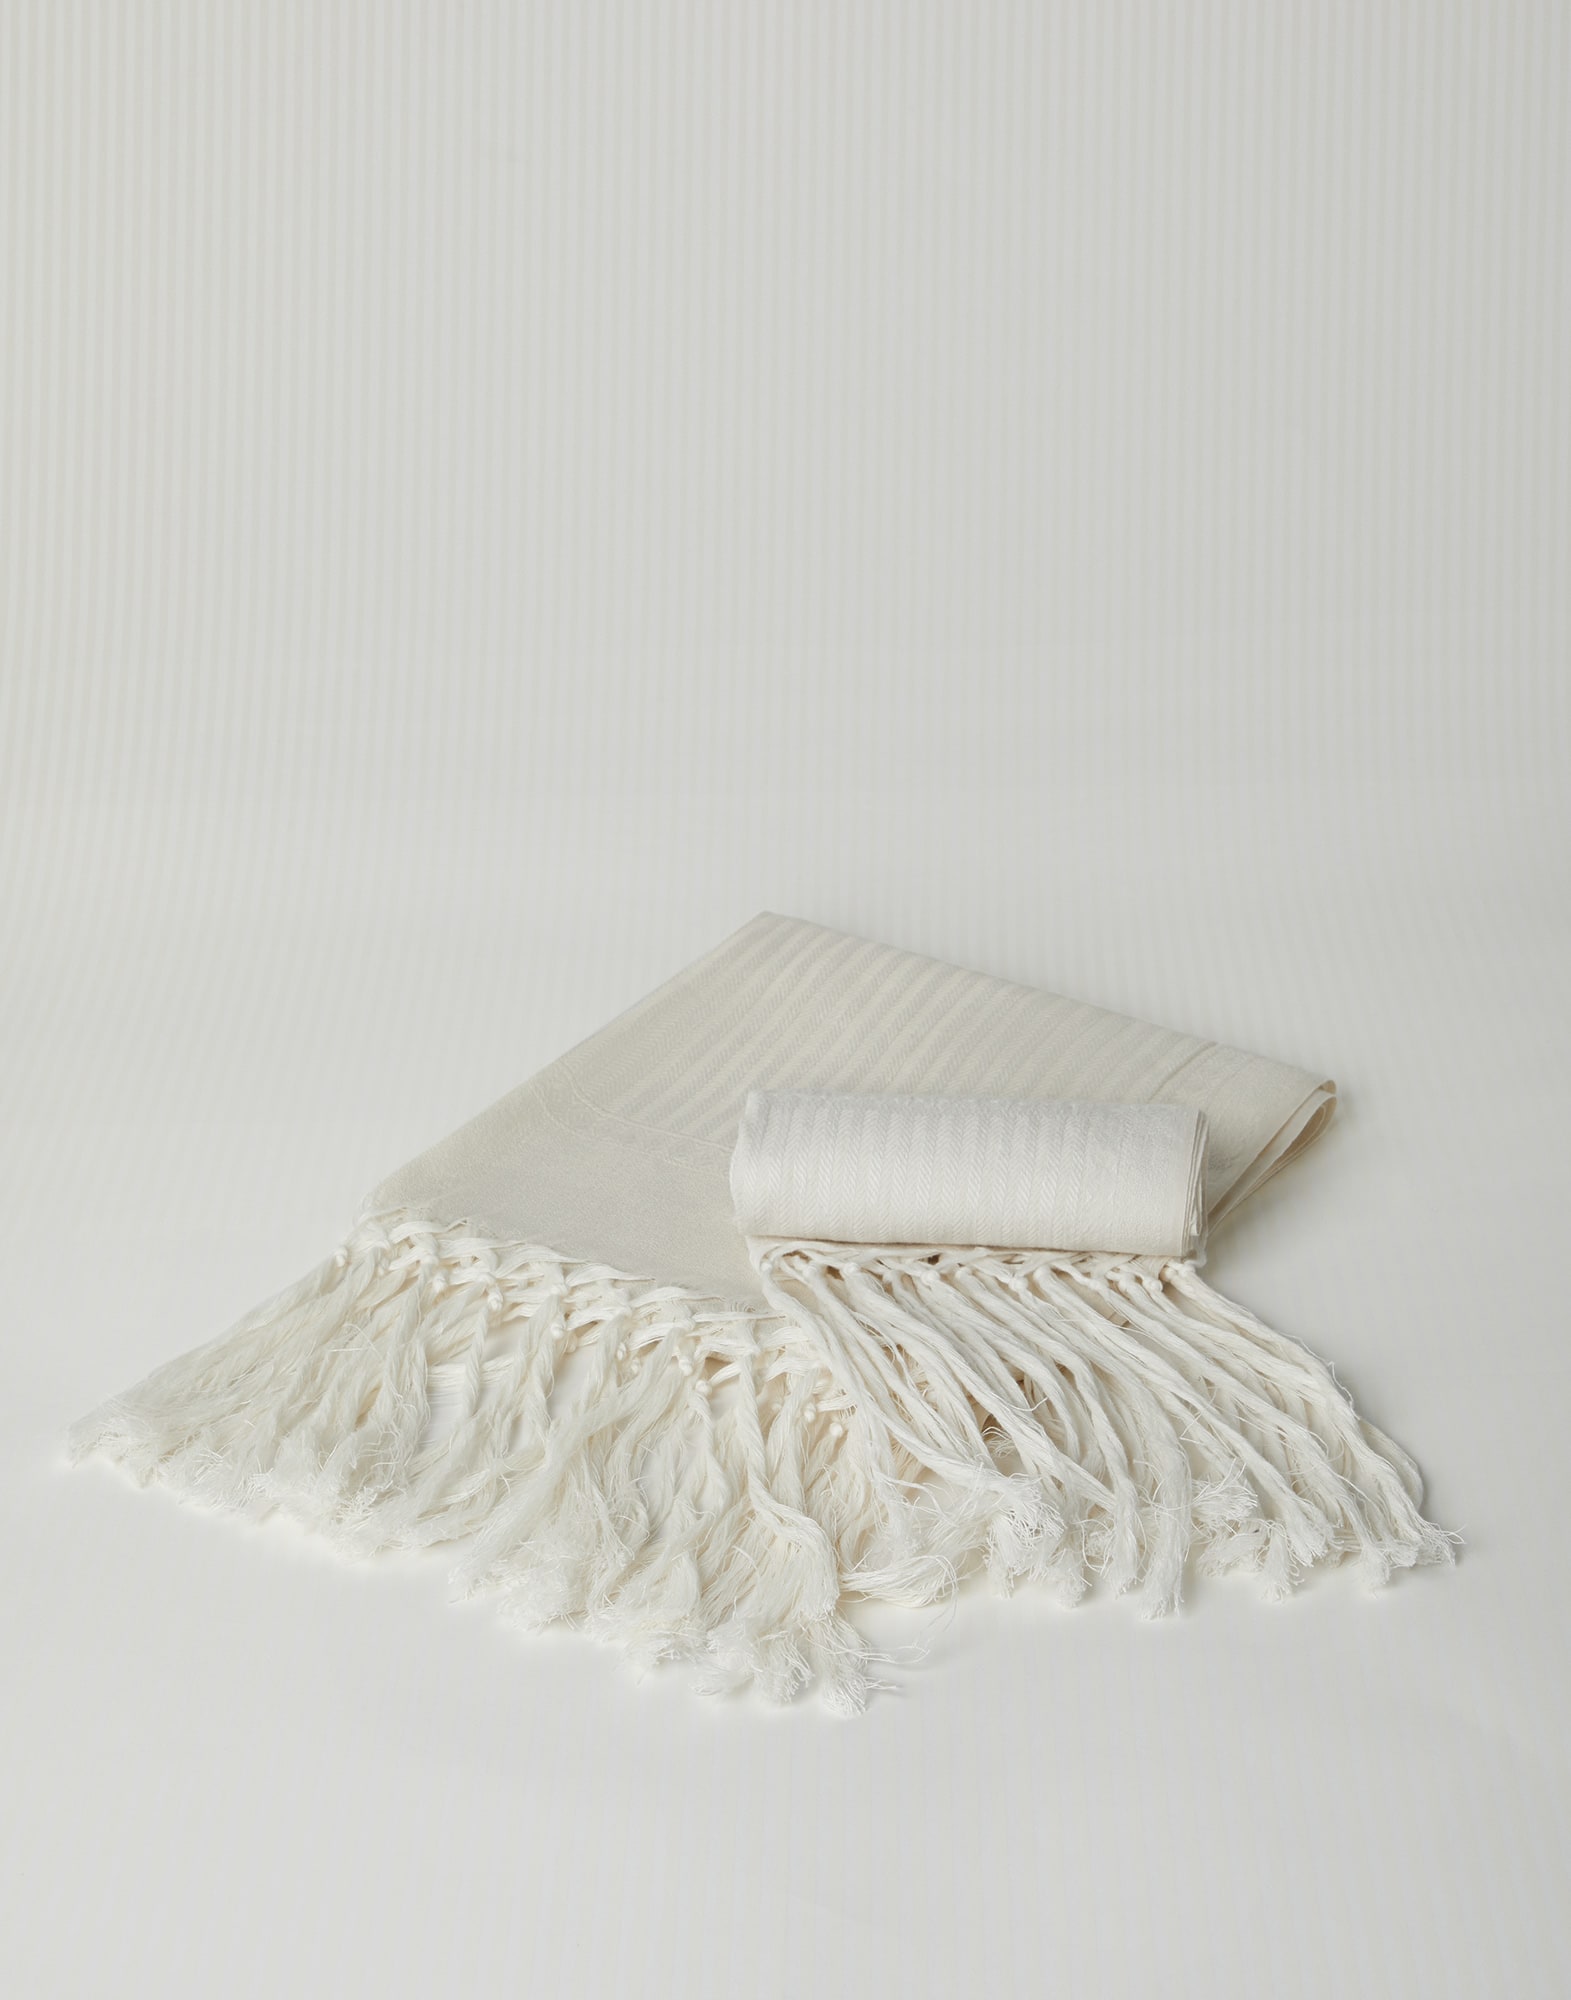 Pair of "Winter in White" towels